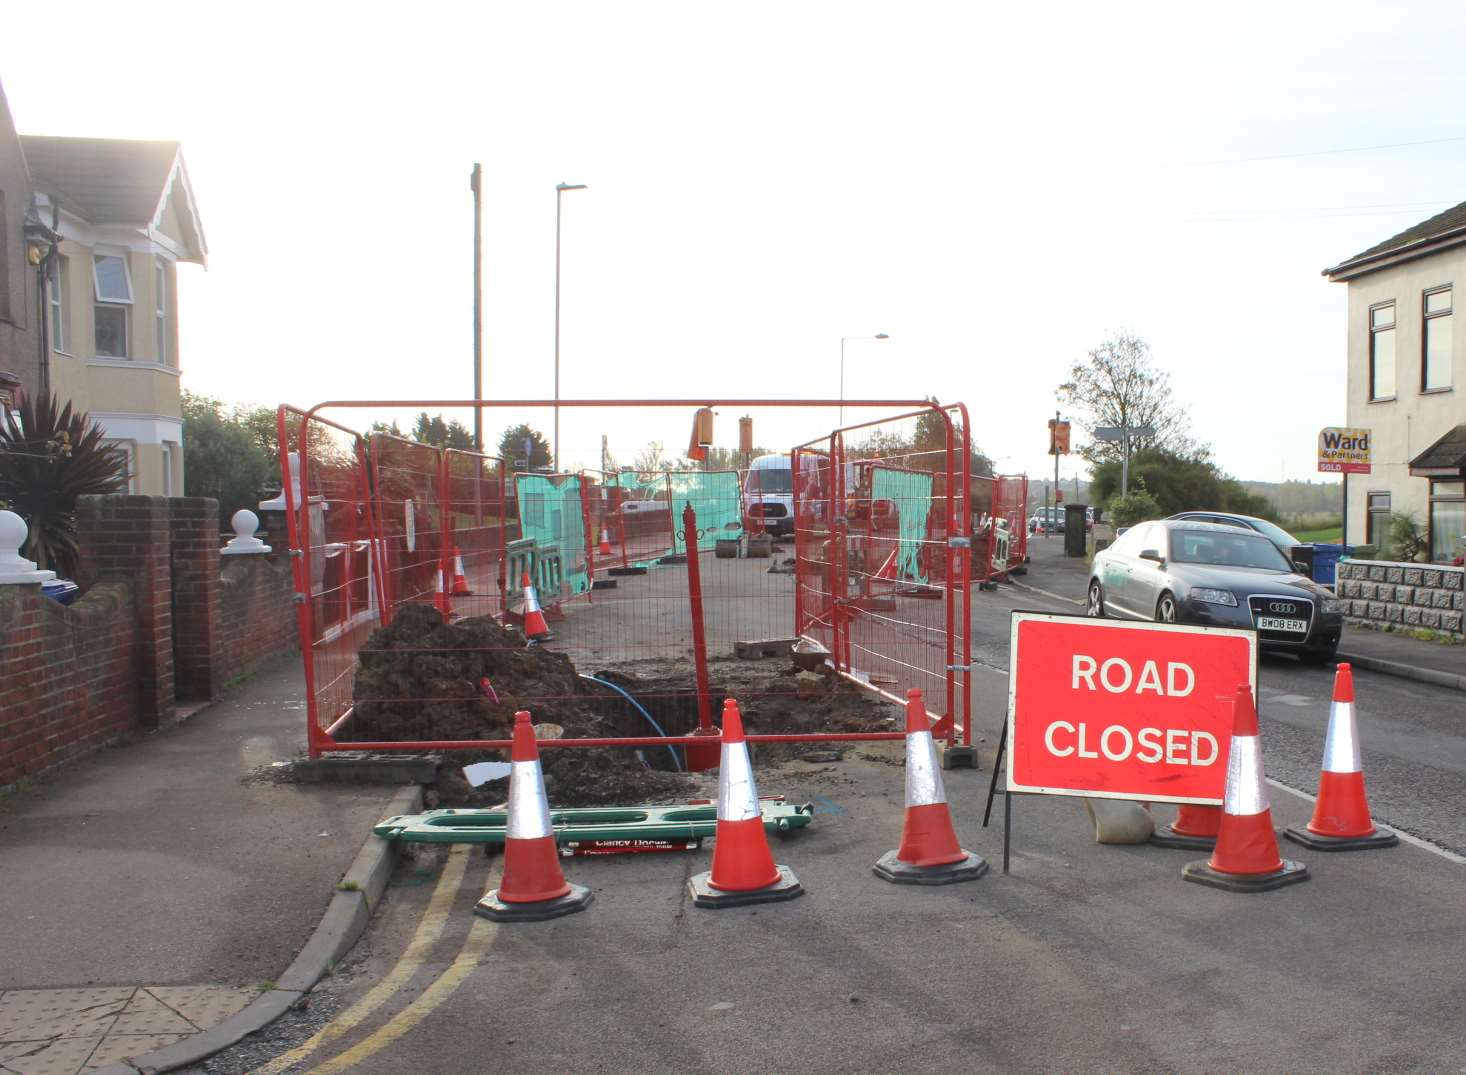 Road closed: No access to Halfway Road from Sheerness.